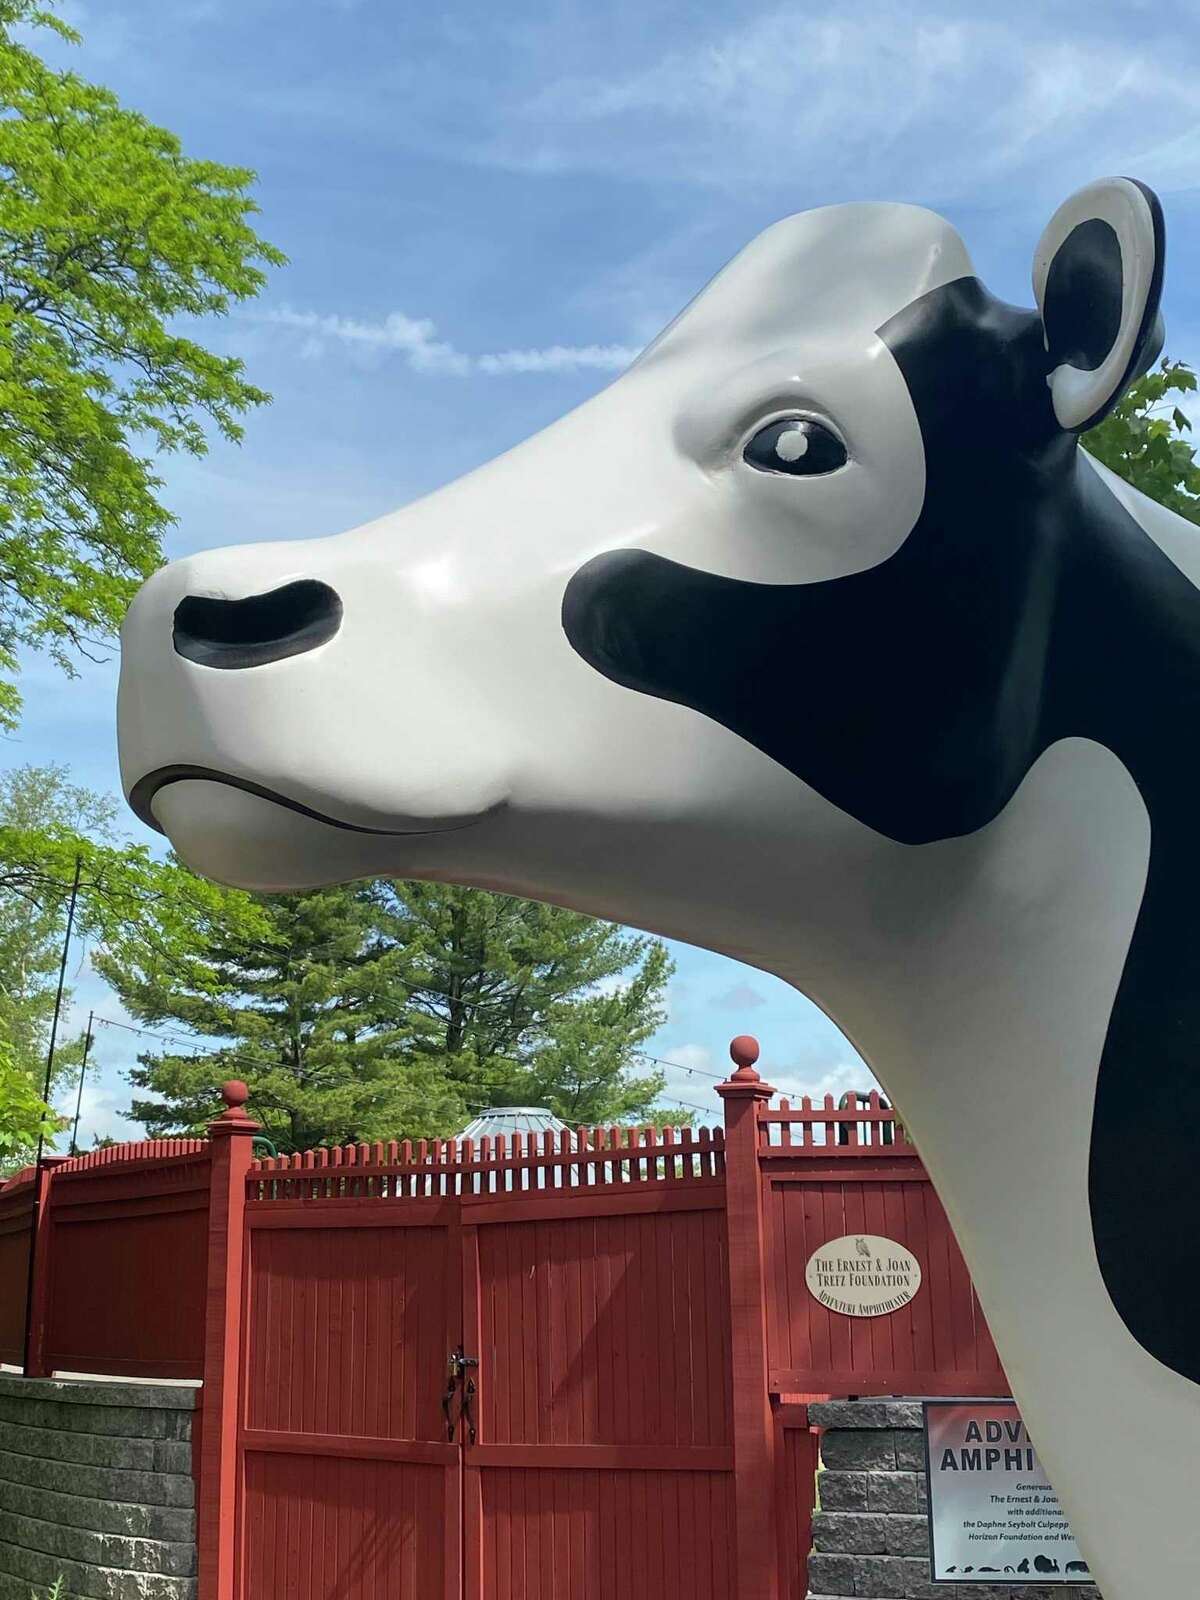 The nameless fiberglass cow at Connecticut's Beardsley Zoo returned May 26, 2022 after going to CT Composites in South Windsor for refurbishing.